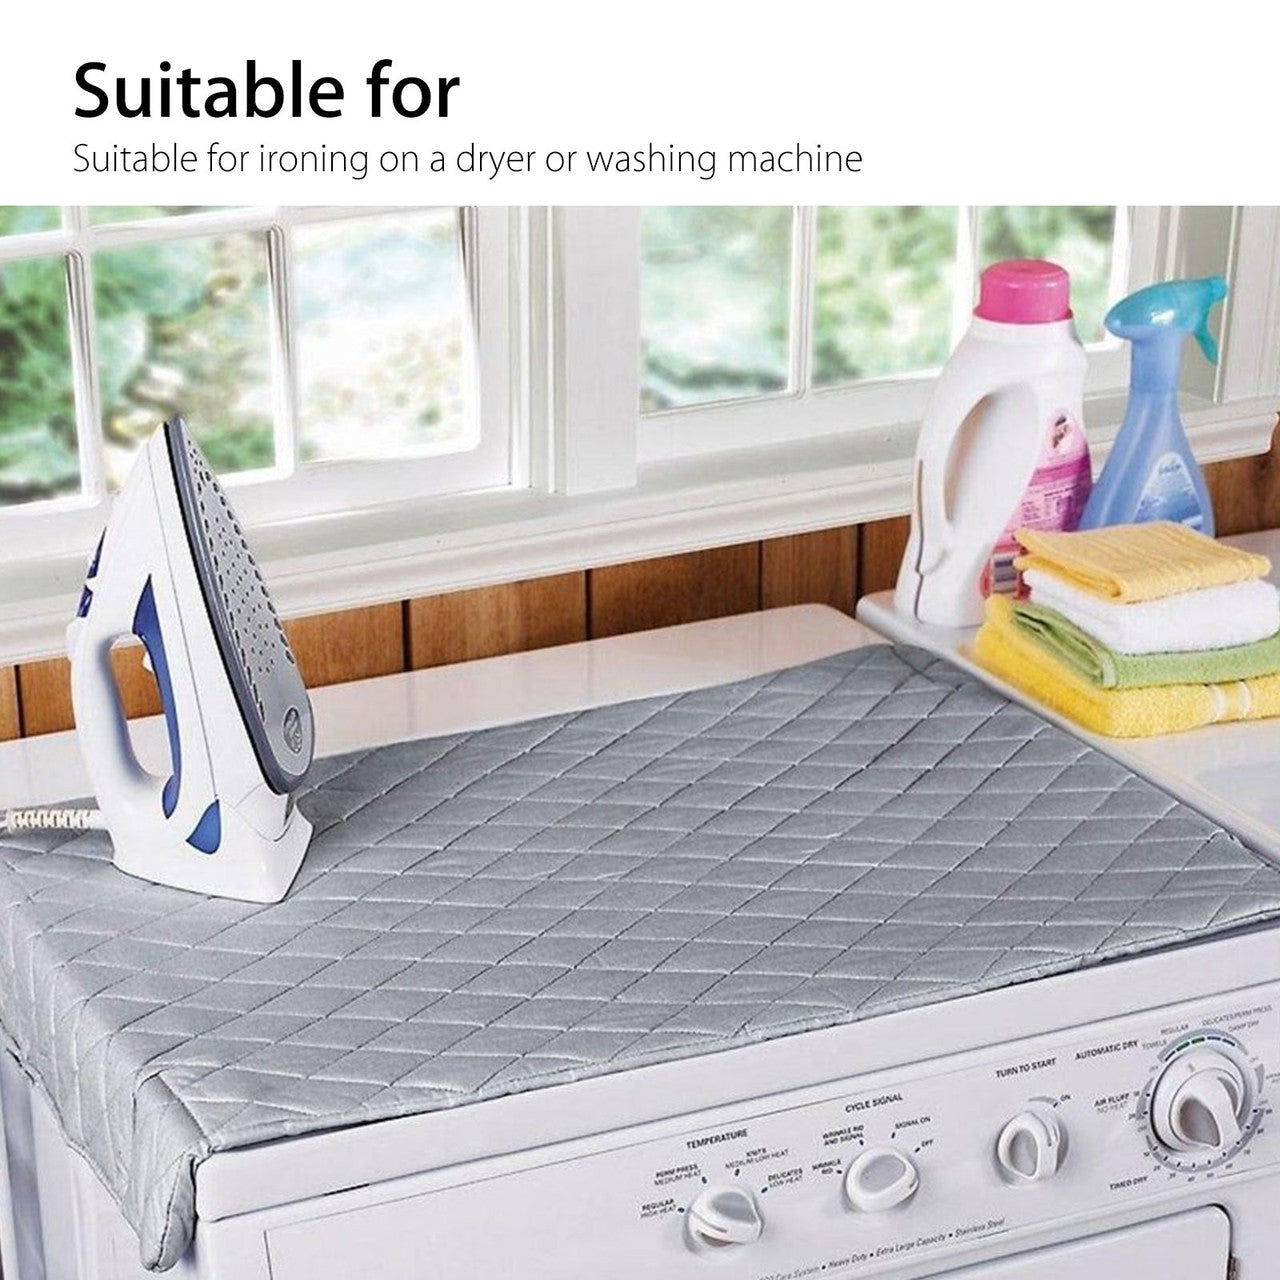 Portable Cover for Washer, Dryer, Table, Bed, Countertop. Dry Safe & Heat Resistant Pad. Quilted Laundry Mat fo Everywhere